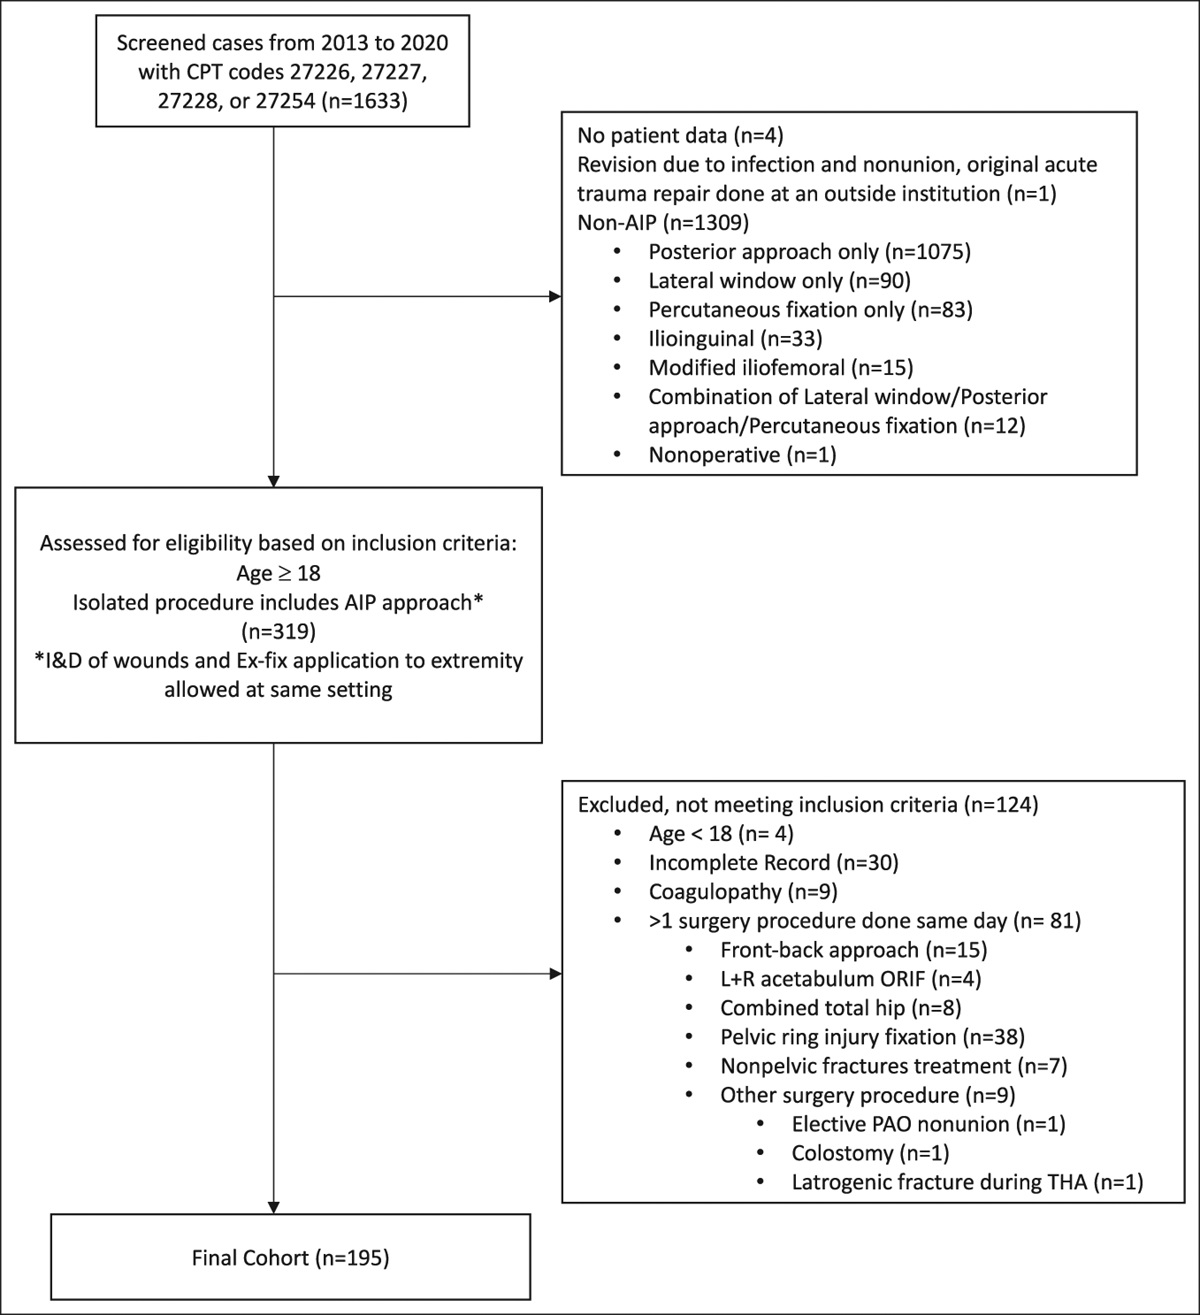 Tranexamic Acid and Holding Venous Thromboembolism Prophylaxis Morning of Surgery Do Not Decrease Transfusion Requirements in Patients Undergoing Anterior Intrapelvic Approach for Acetabular Open Reduction and Internal Fixation